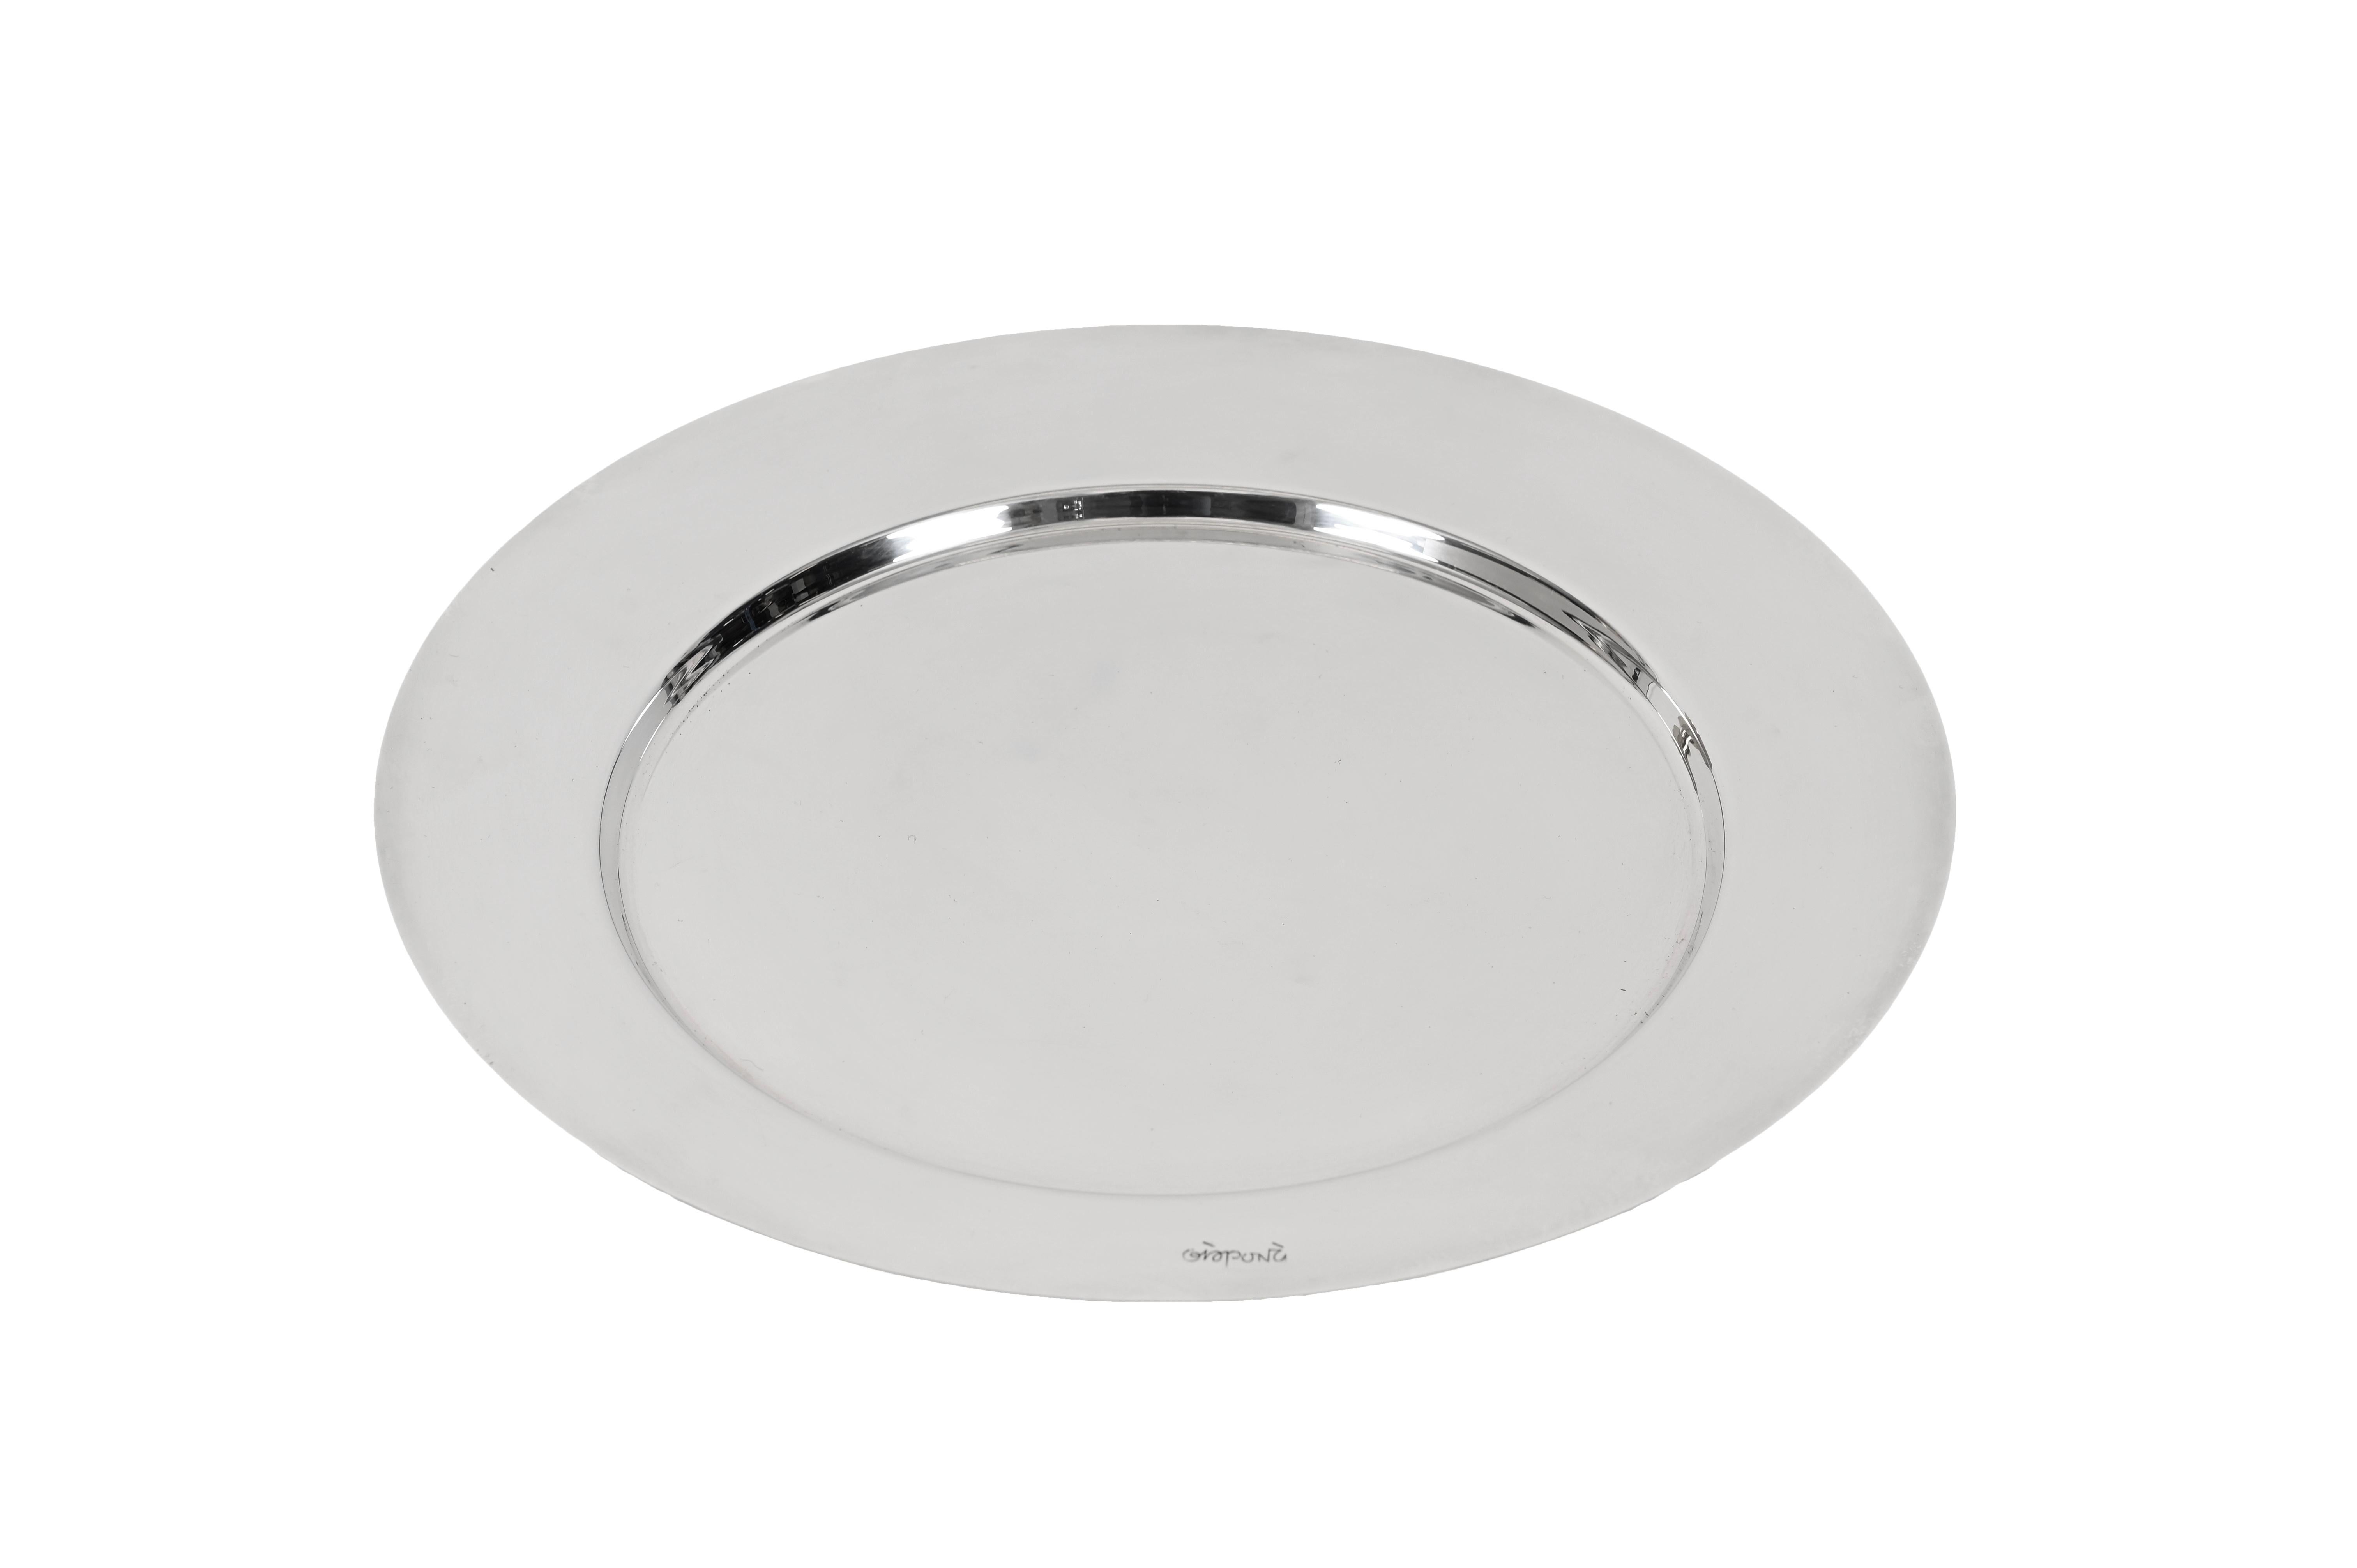 Gio Ponti for Cleto Munari Modernist Silver Plated Serving Plate Italy, 1980s For Sale 9